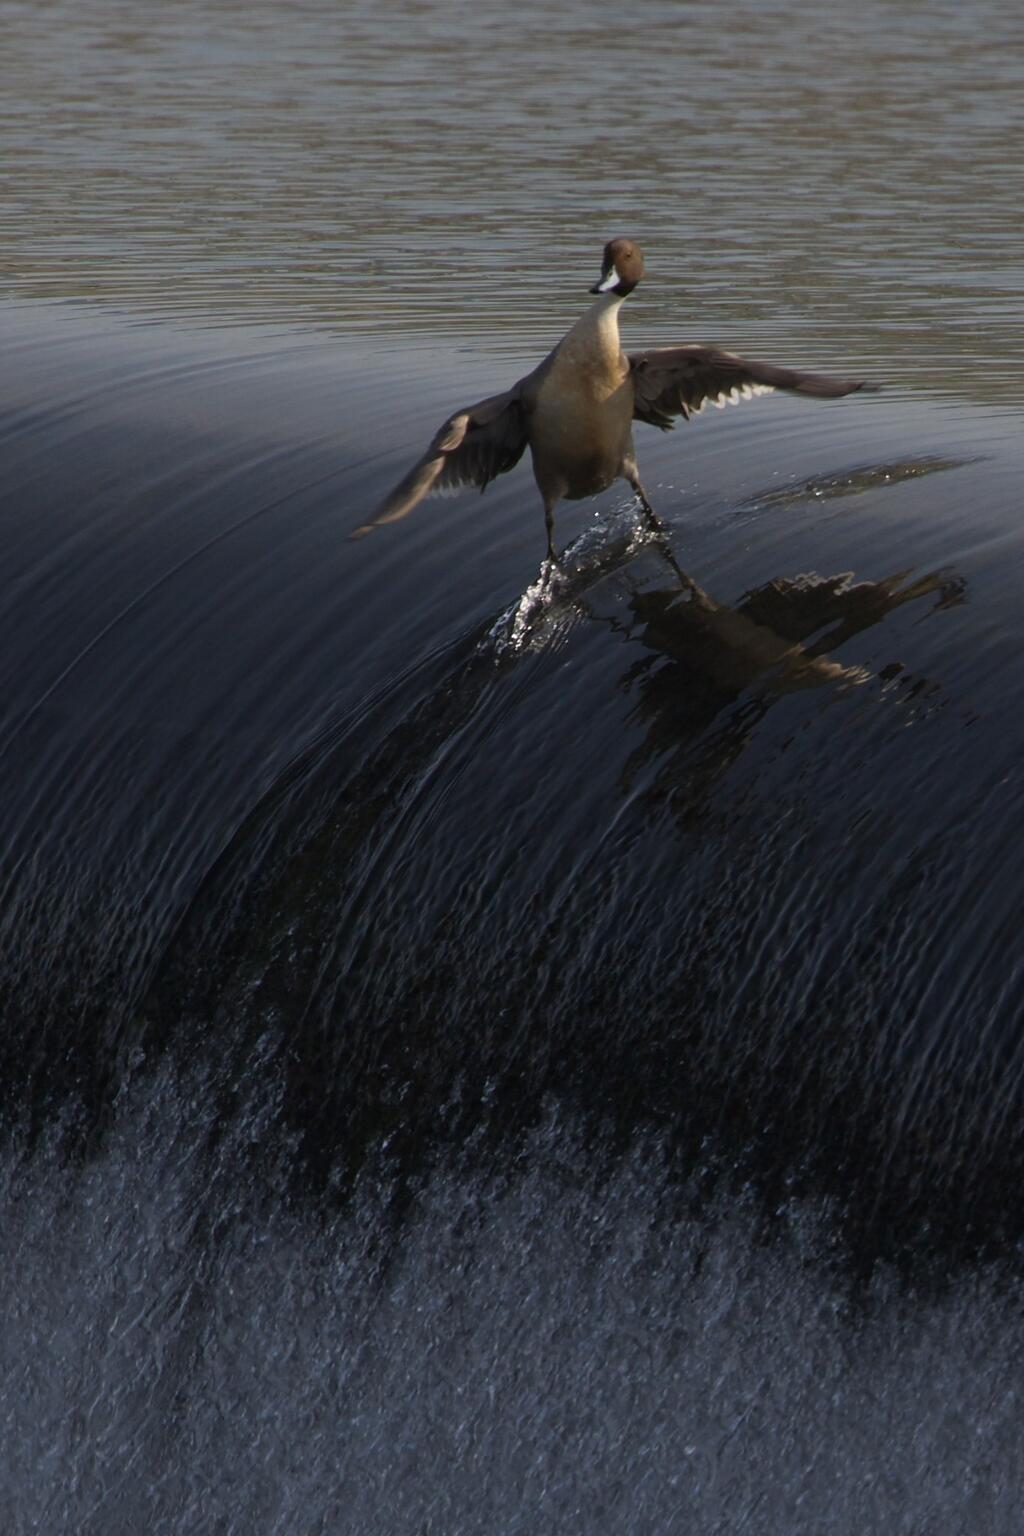 Mighty Duck!